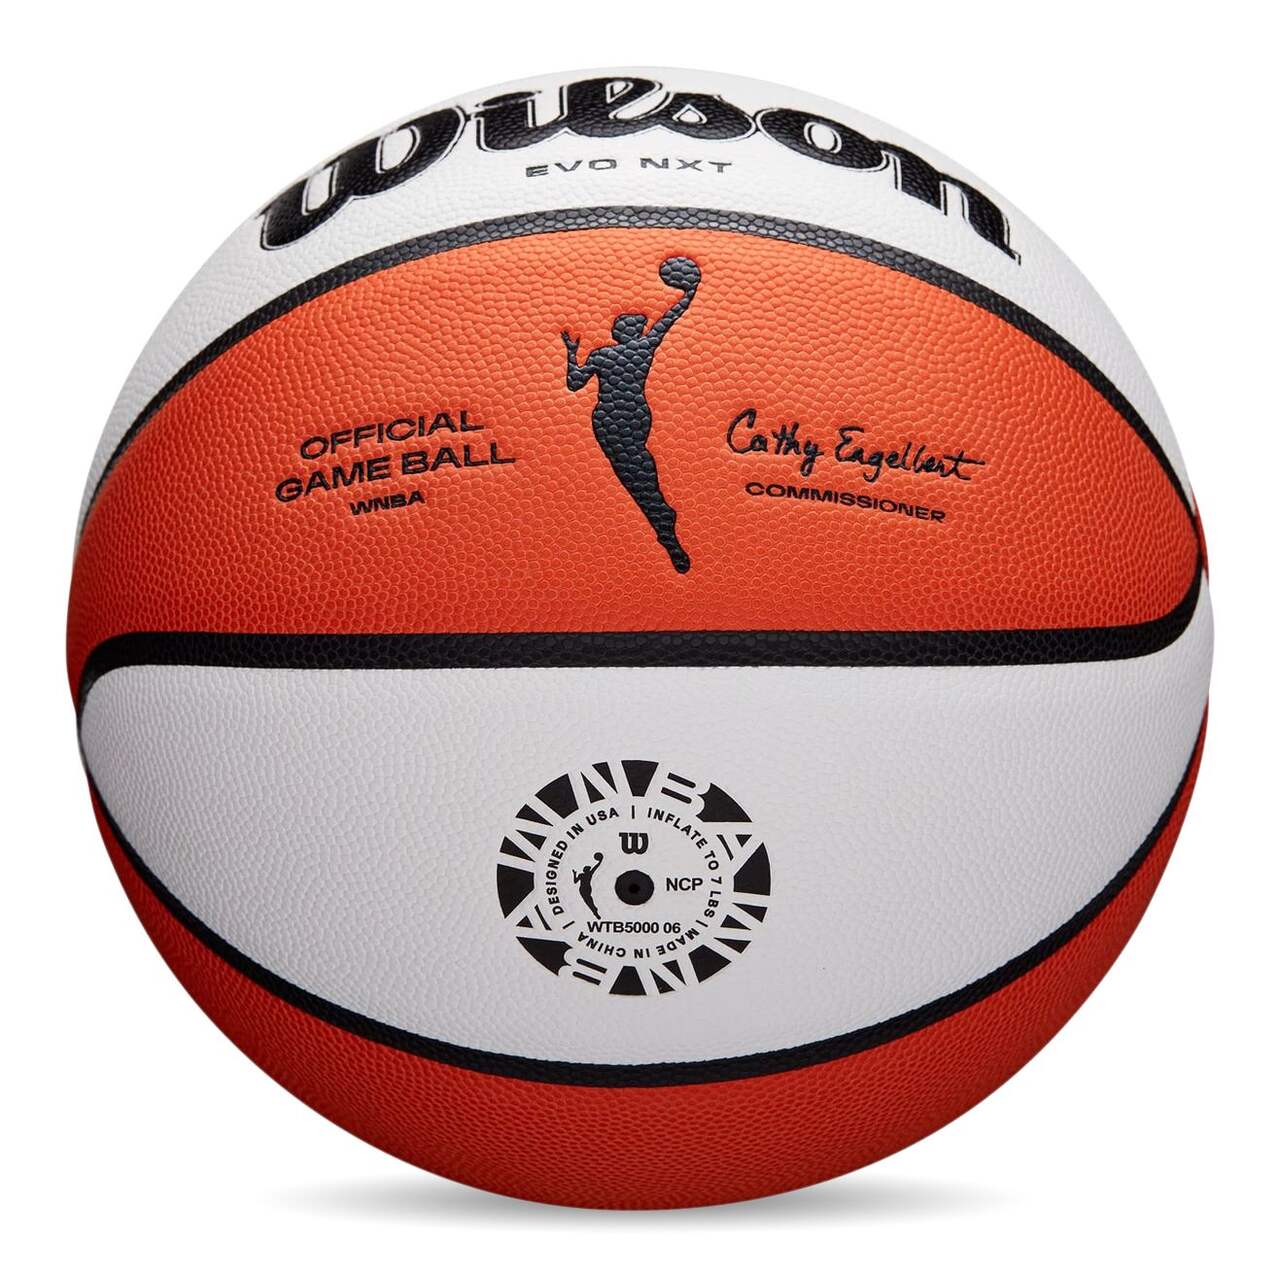 Wilson XG Crossgrip Composite Leather Basketball, Official Size 7 (29.5-in)